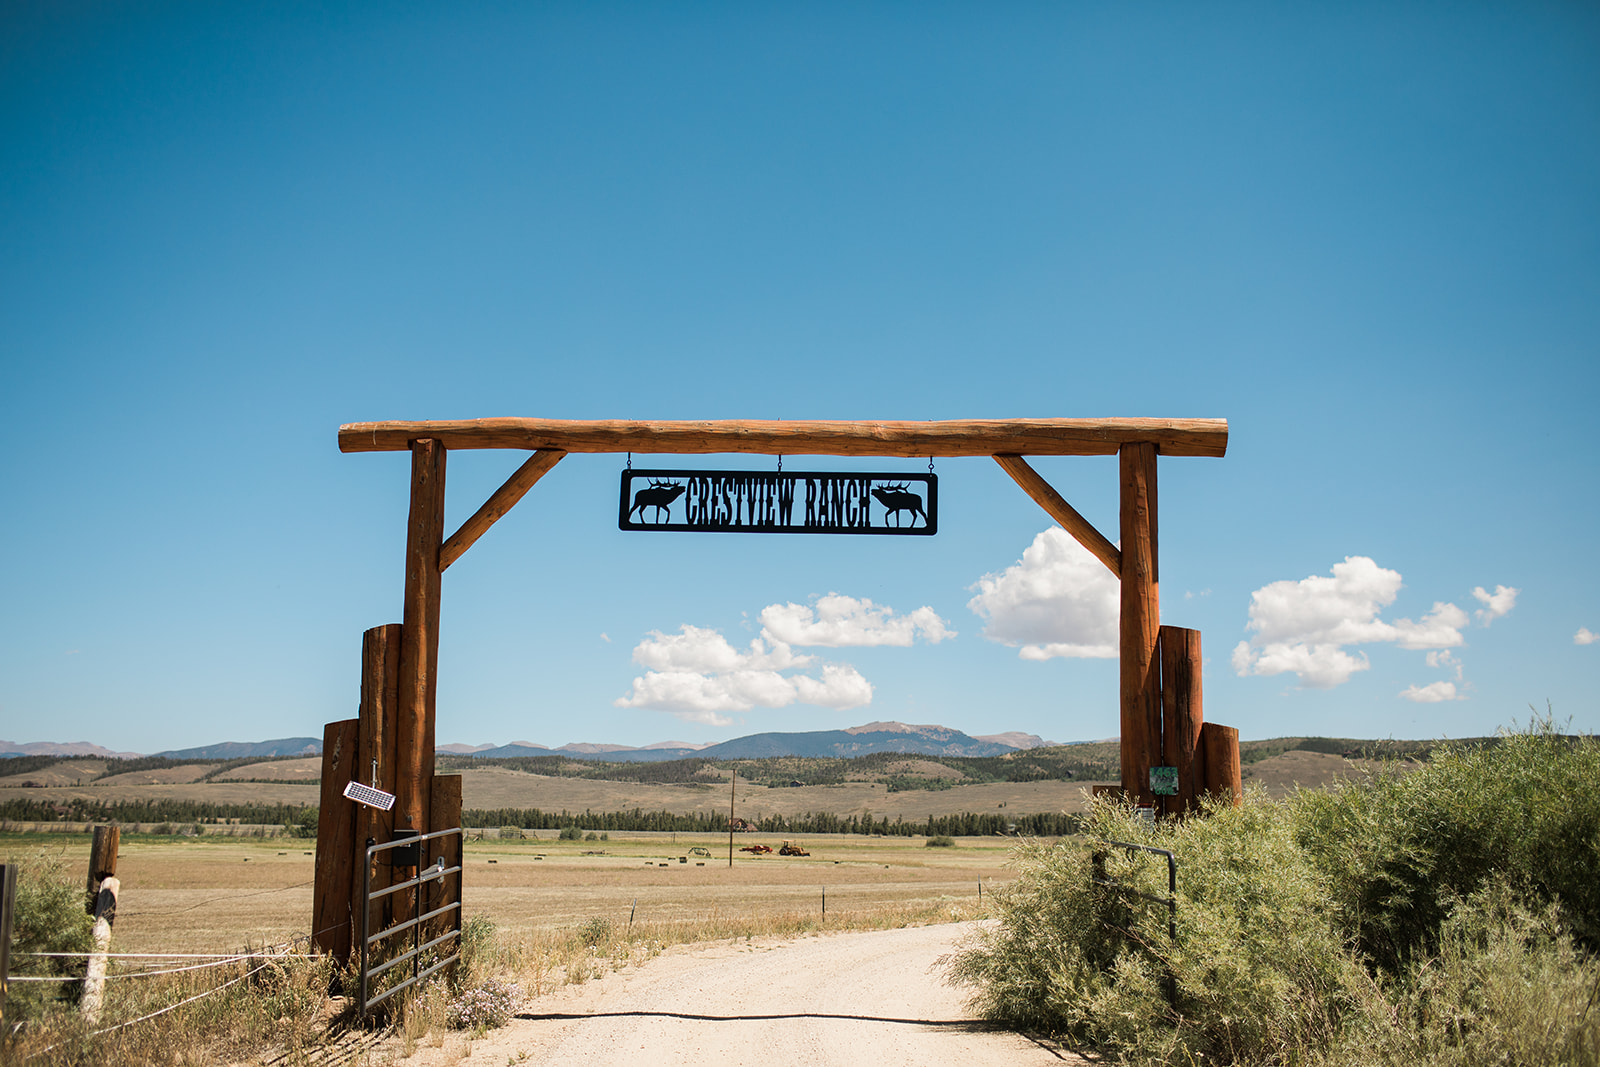 sign over Crestview Ranch entry